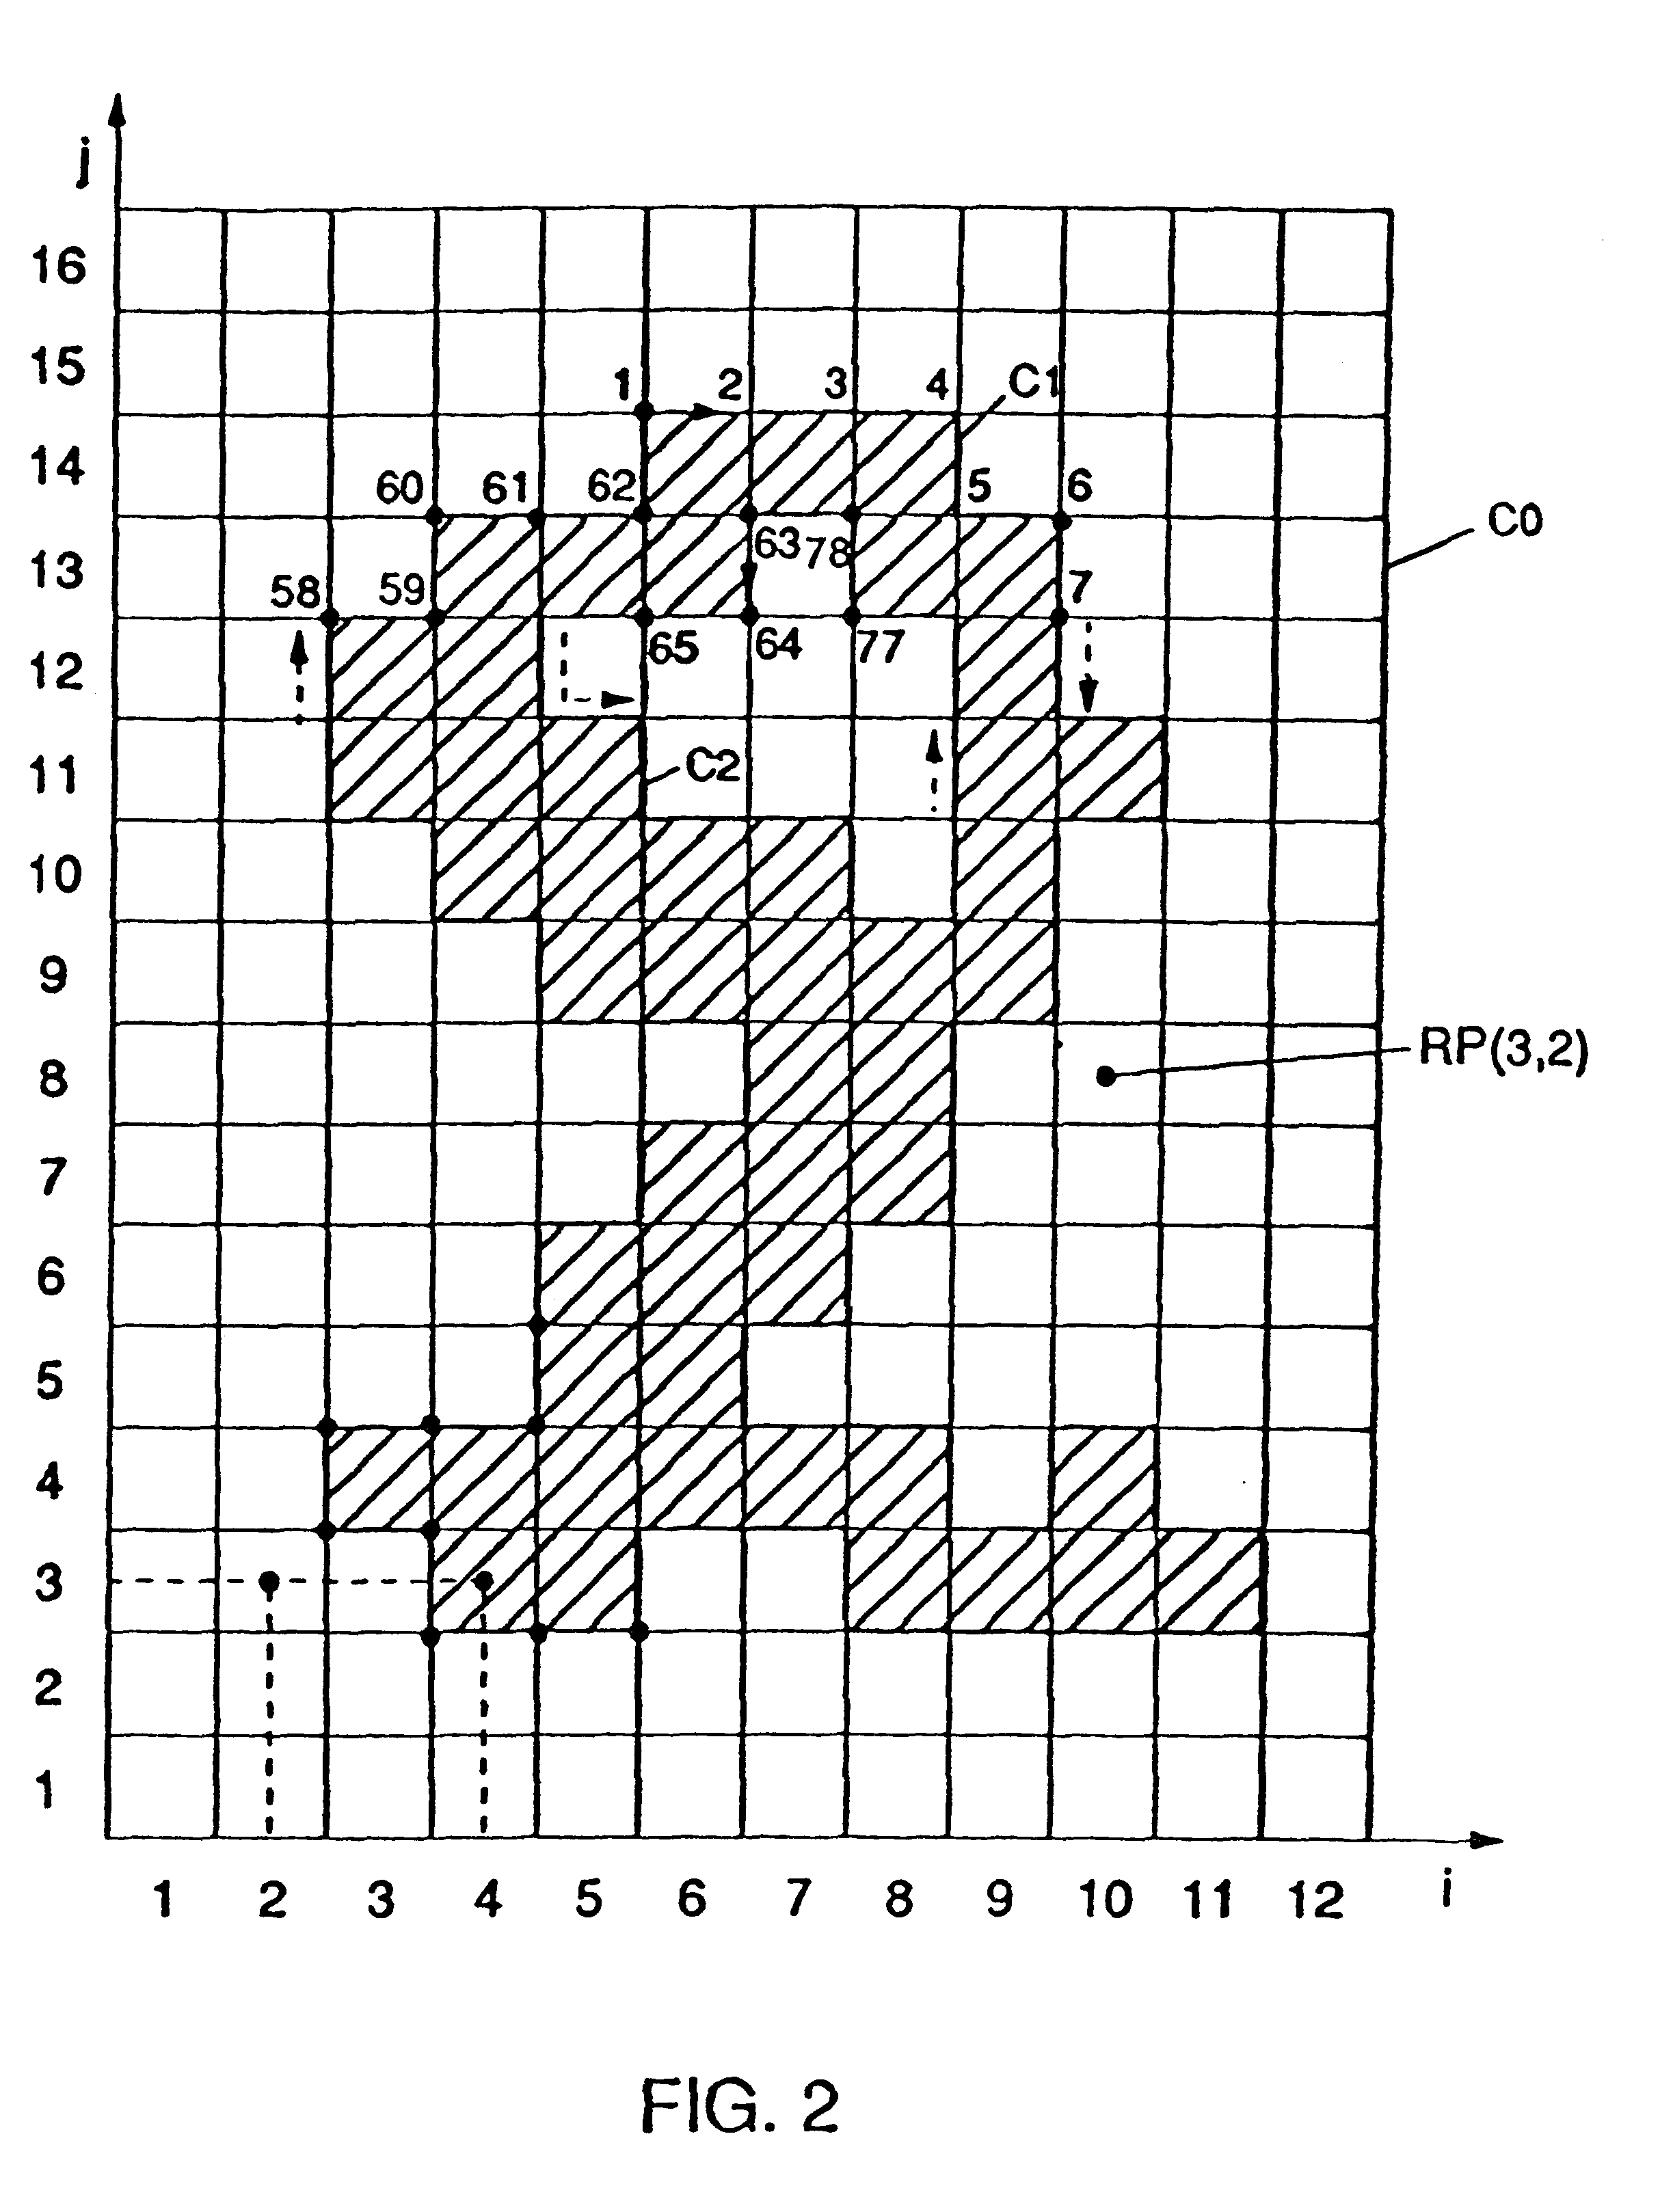 Method for deriving character features in a character recognition system